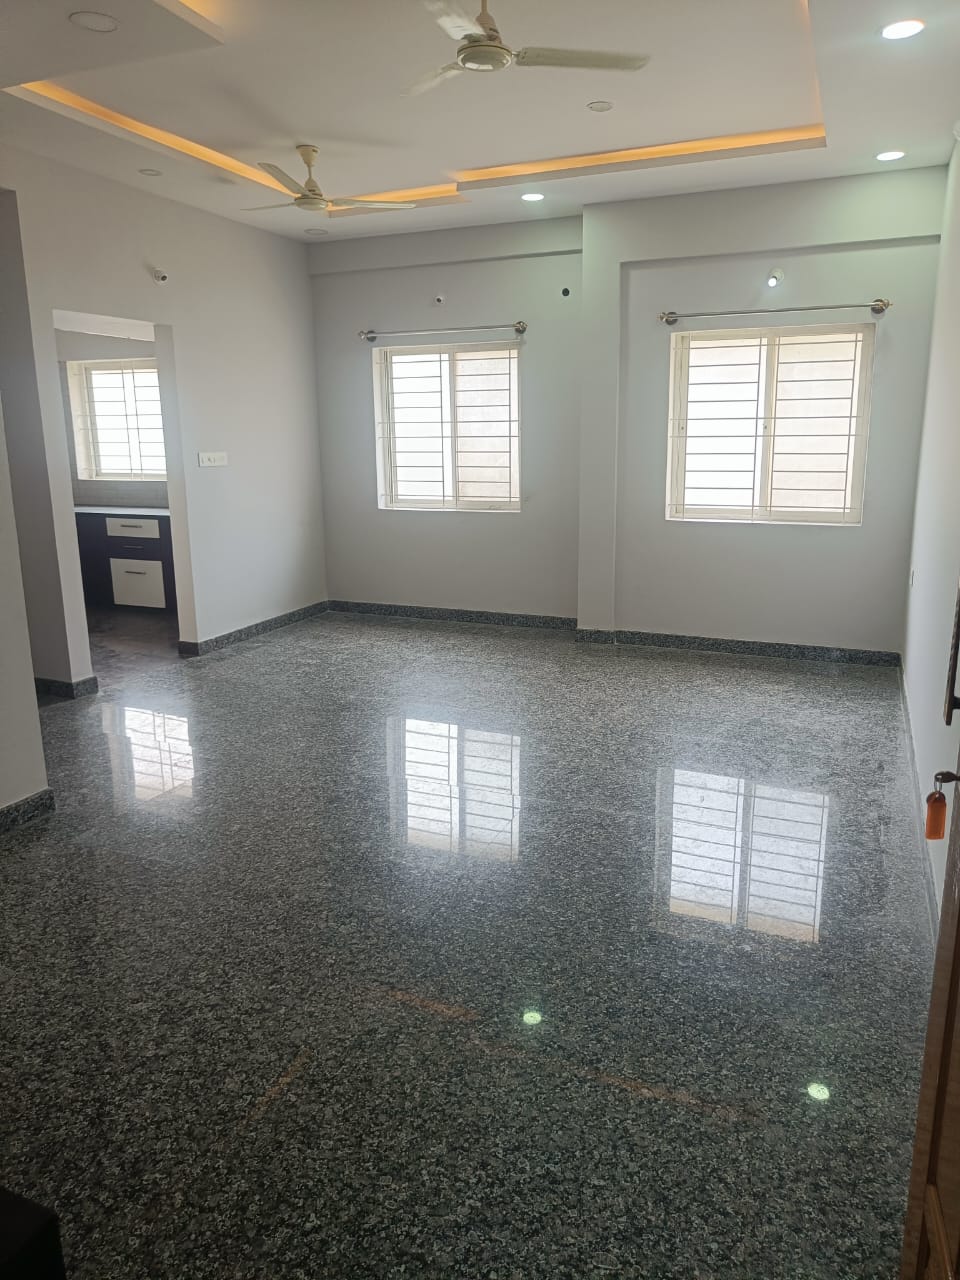 3 BHK Independent House for Lease Only at JAML2 - 5054-27lakh in Kamakshipalya